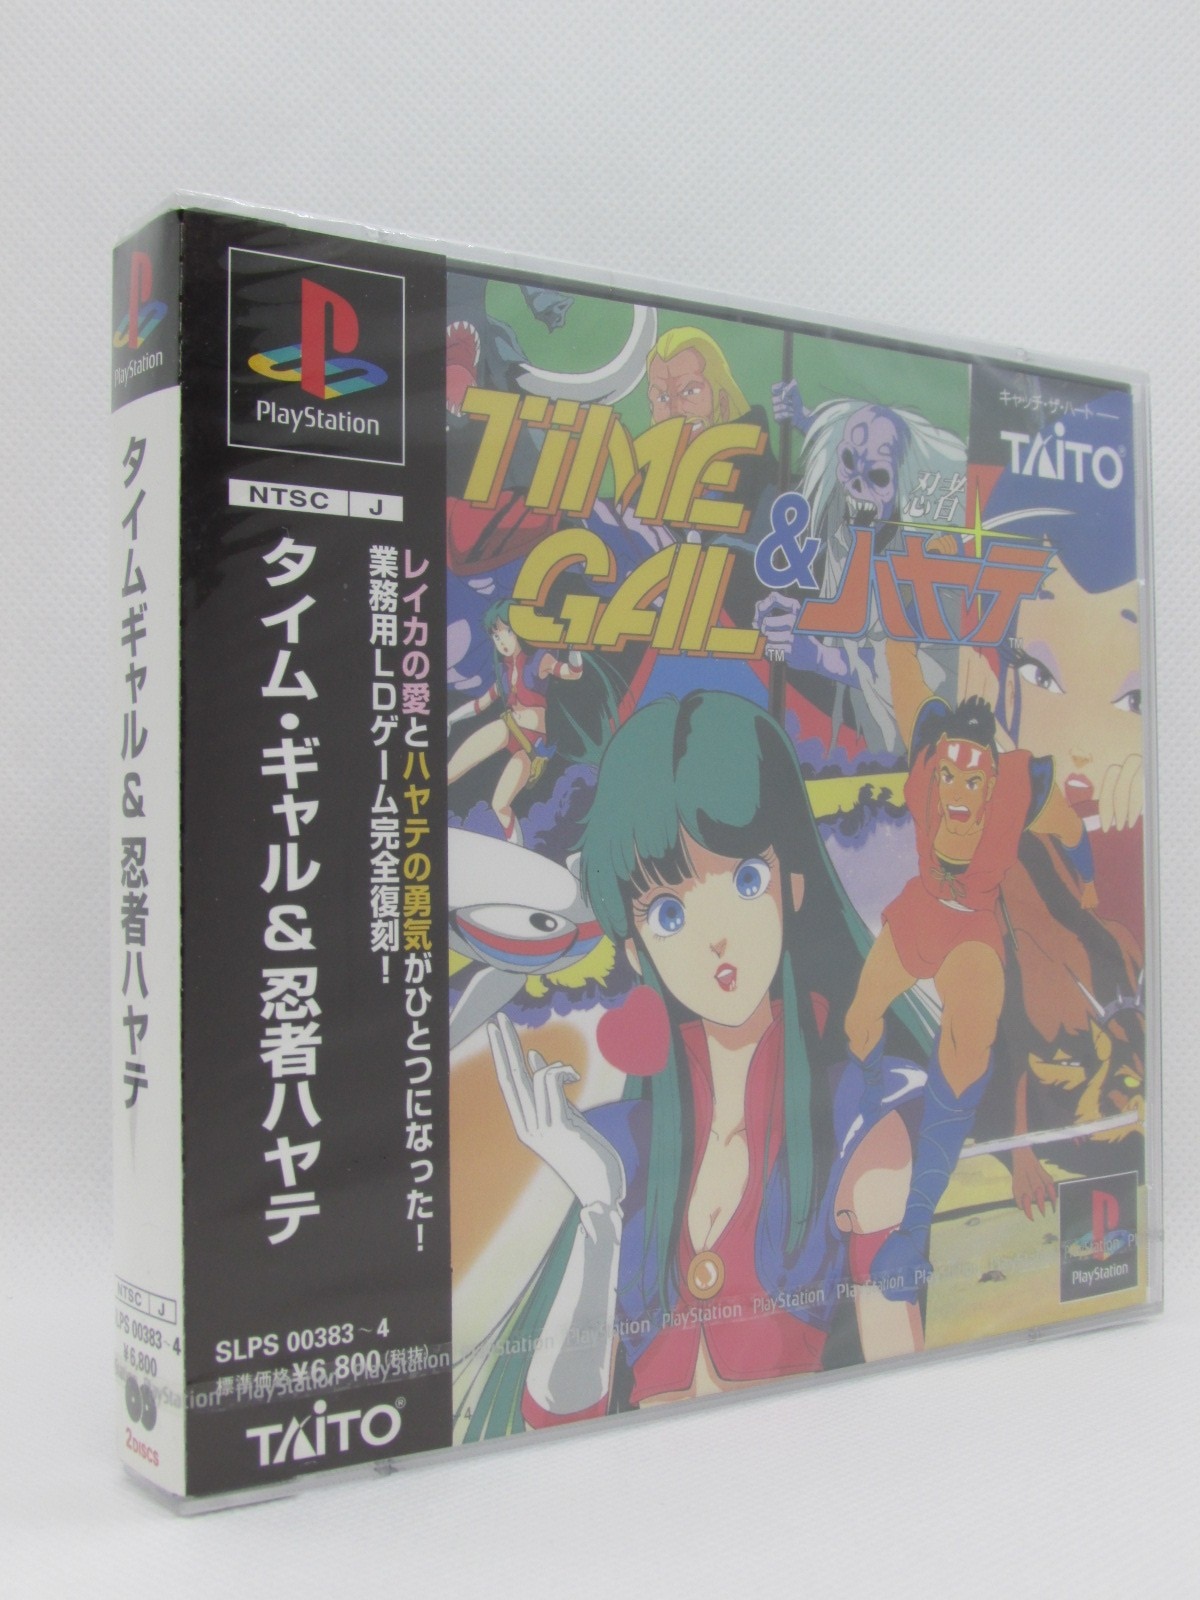 PS タイムギャル＆忍者ハヤテ TIME GAL - 家庭用ゲームソフト